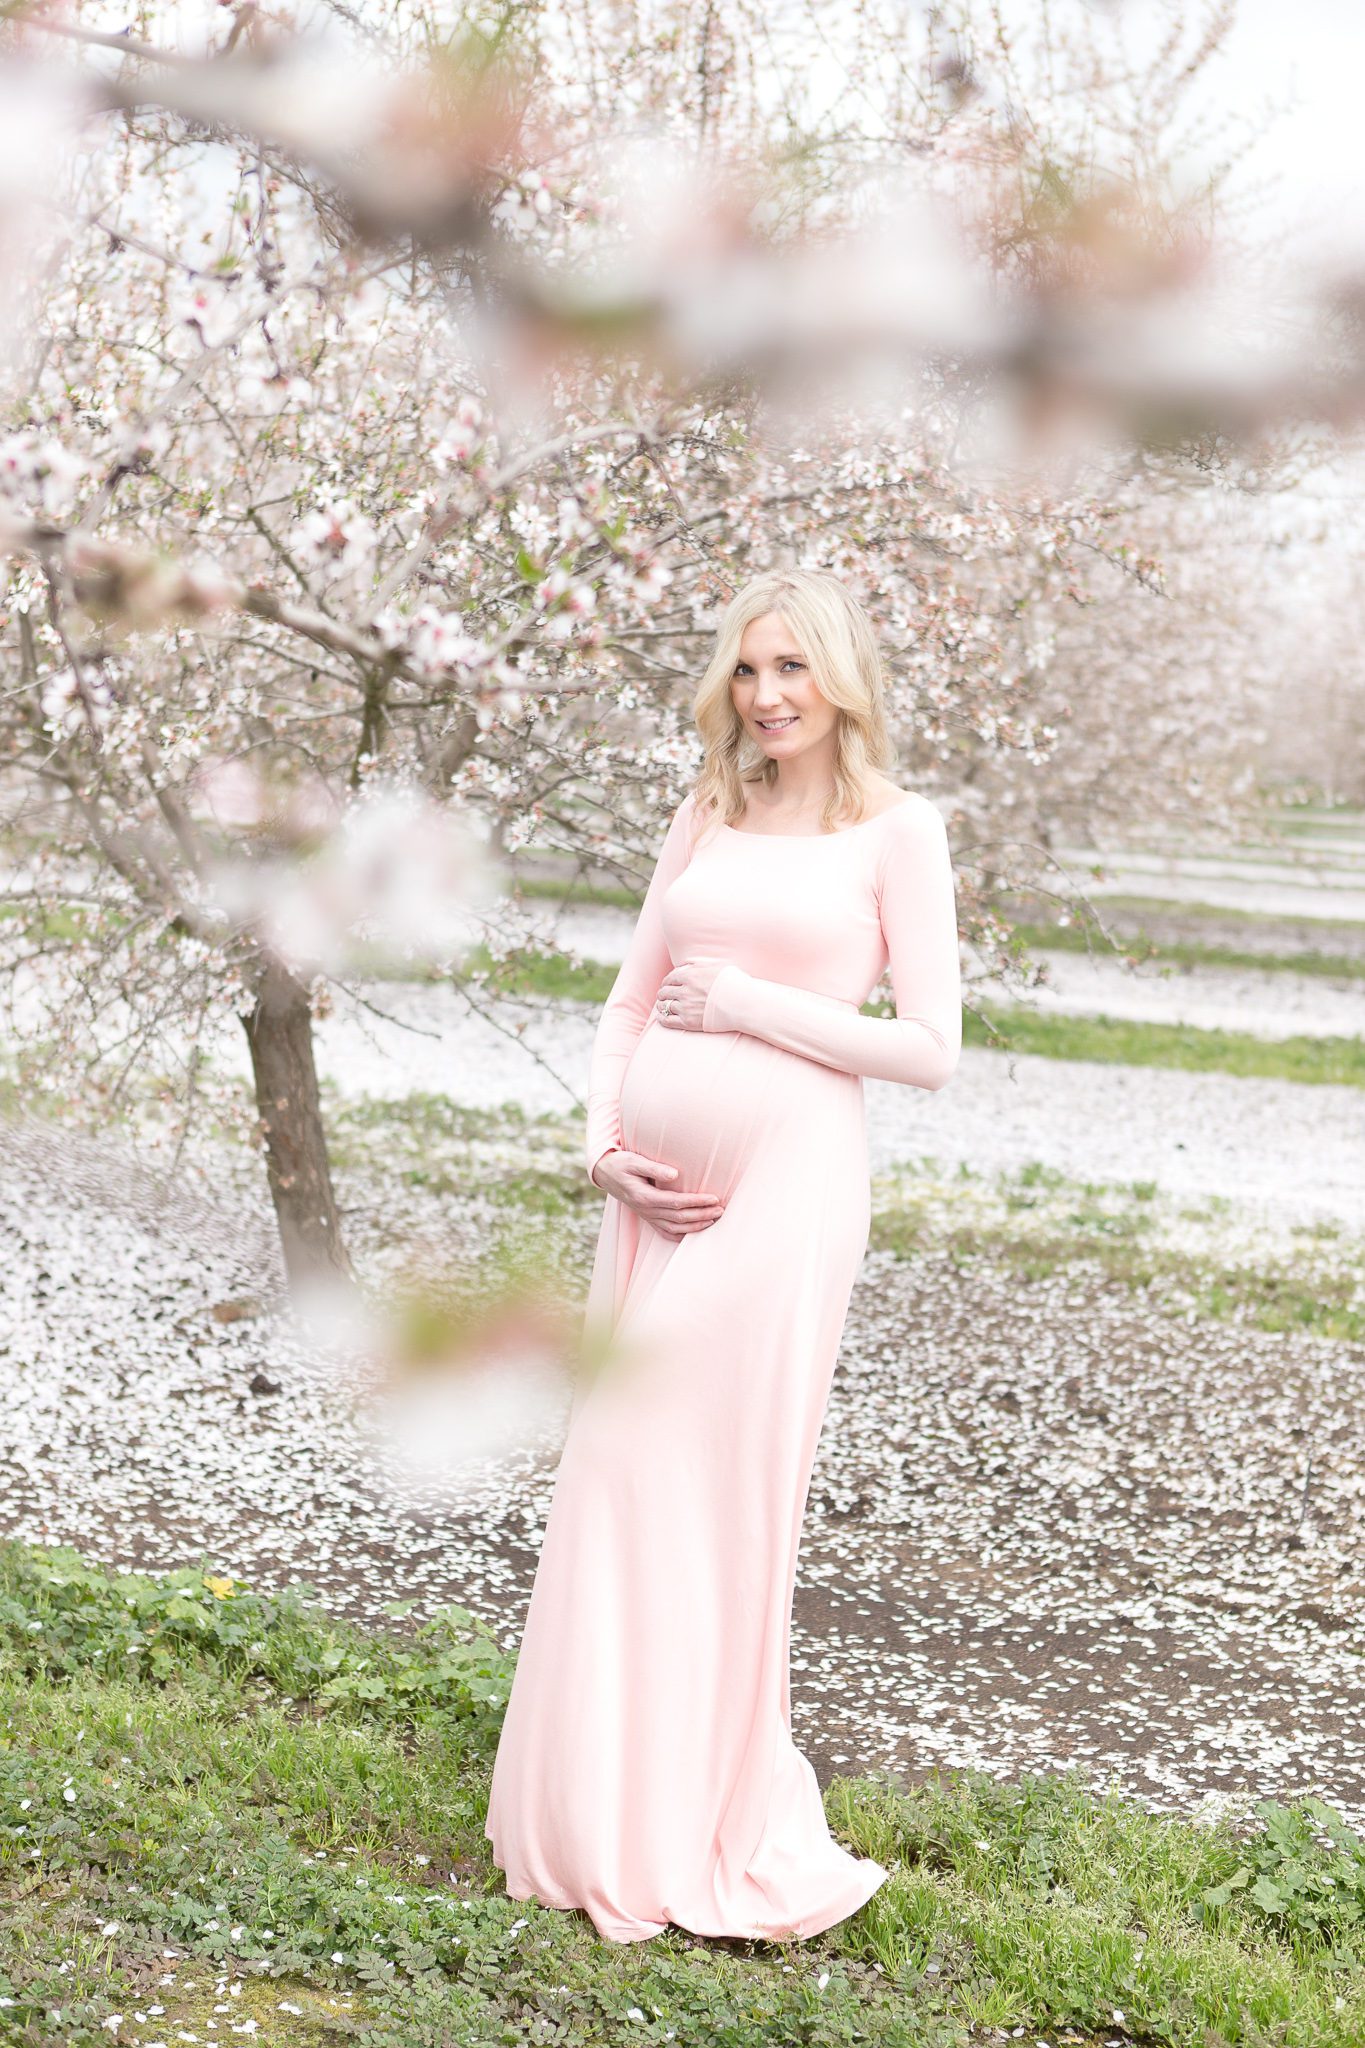 blossom maternity session, pink maternity dress, baby bump 